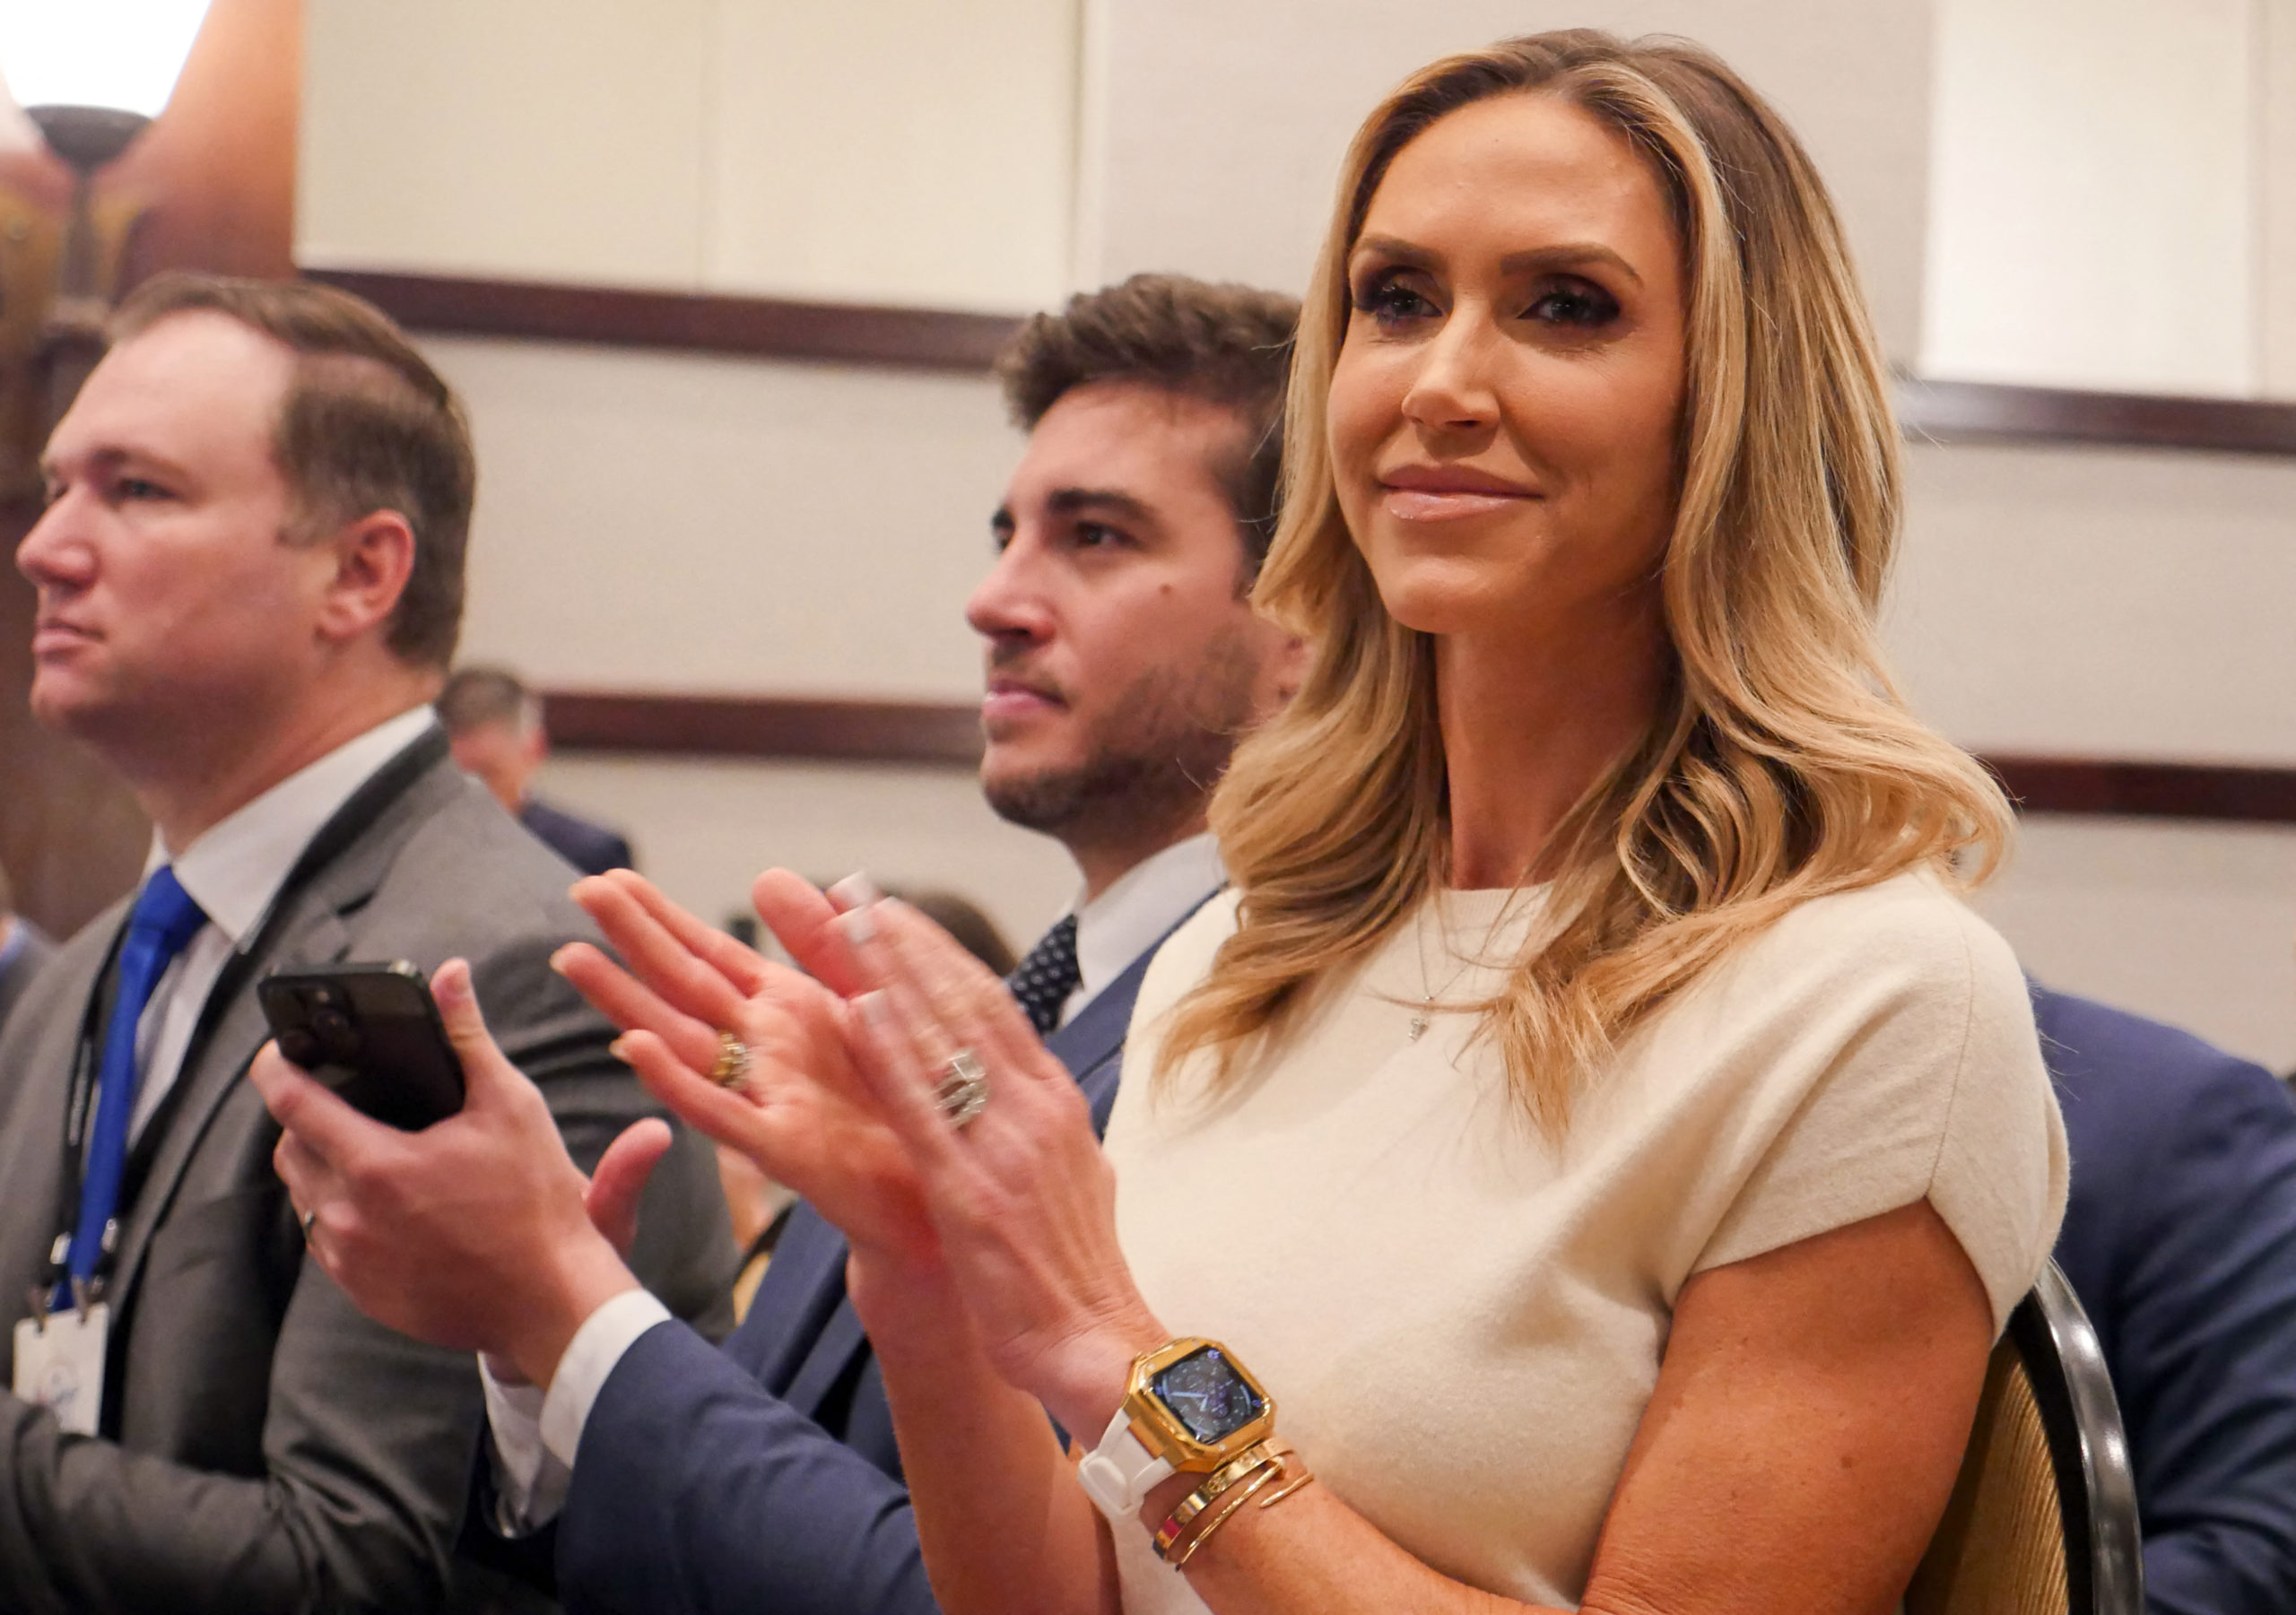 Lara Trump, daughter-in-law of former US President Donald Trump, attends the Republican National Committee (RNC) Spring meeting on March 8, 2024, in Houston, Texas. (Photo by CECILE CLOCHERET/AFP via Getty Images)